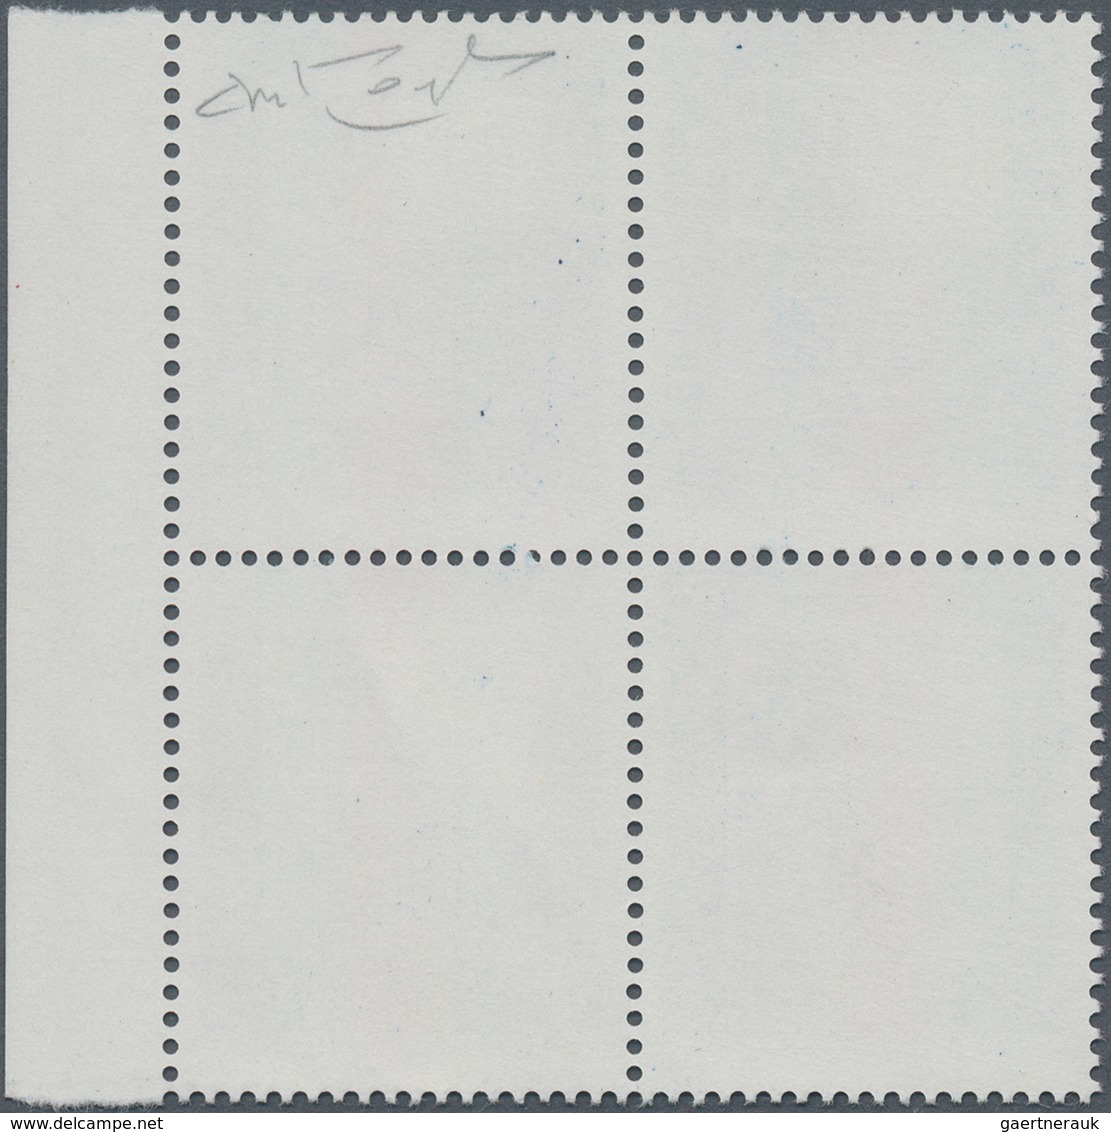 Italien: 1979, "Alti Valori" 3000l. Without Impression Of Head, Right Marginal Block Of Four, Unmoun - Mint/hinged